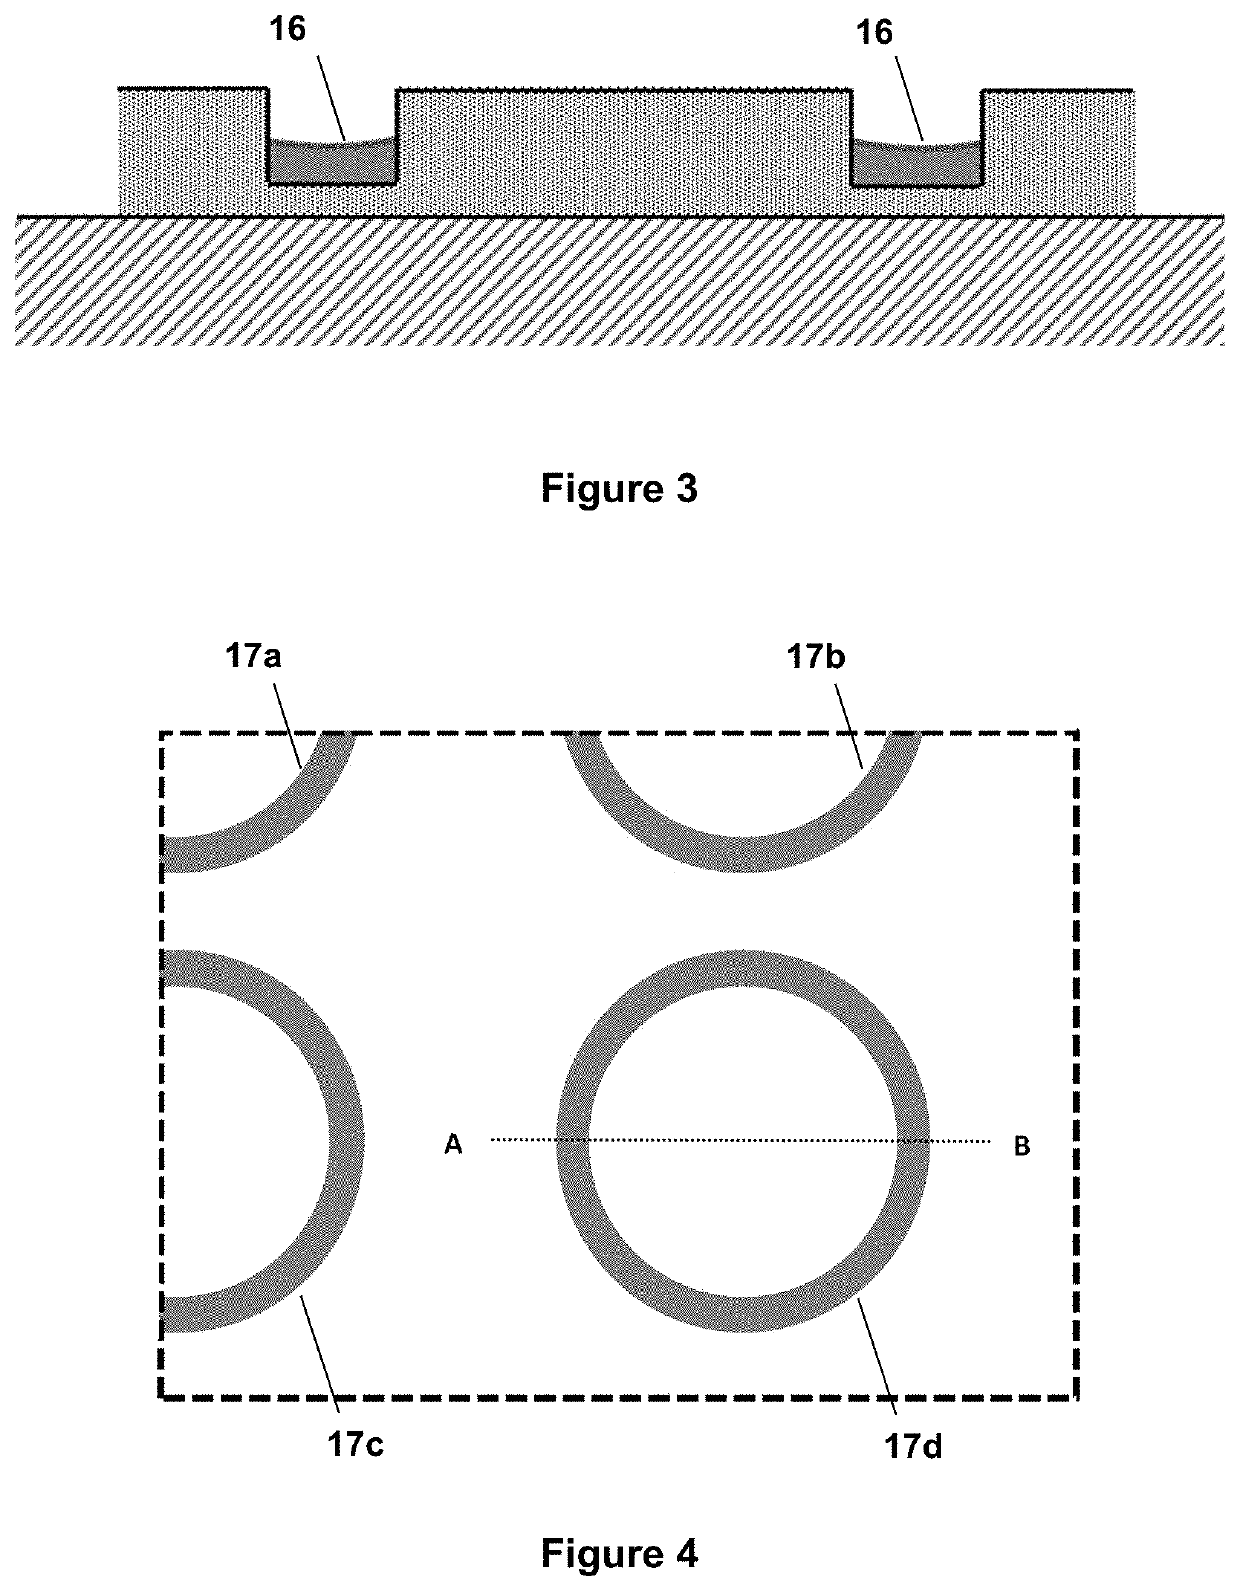 Method of producing micro-image elements on a substrate